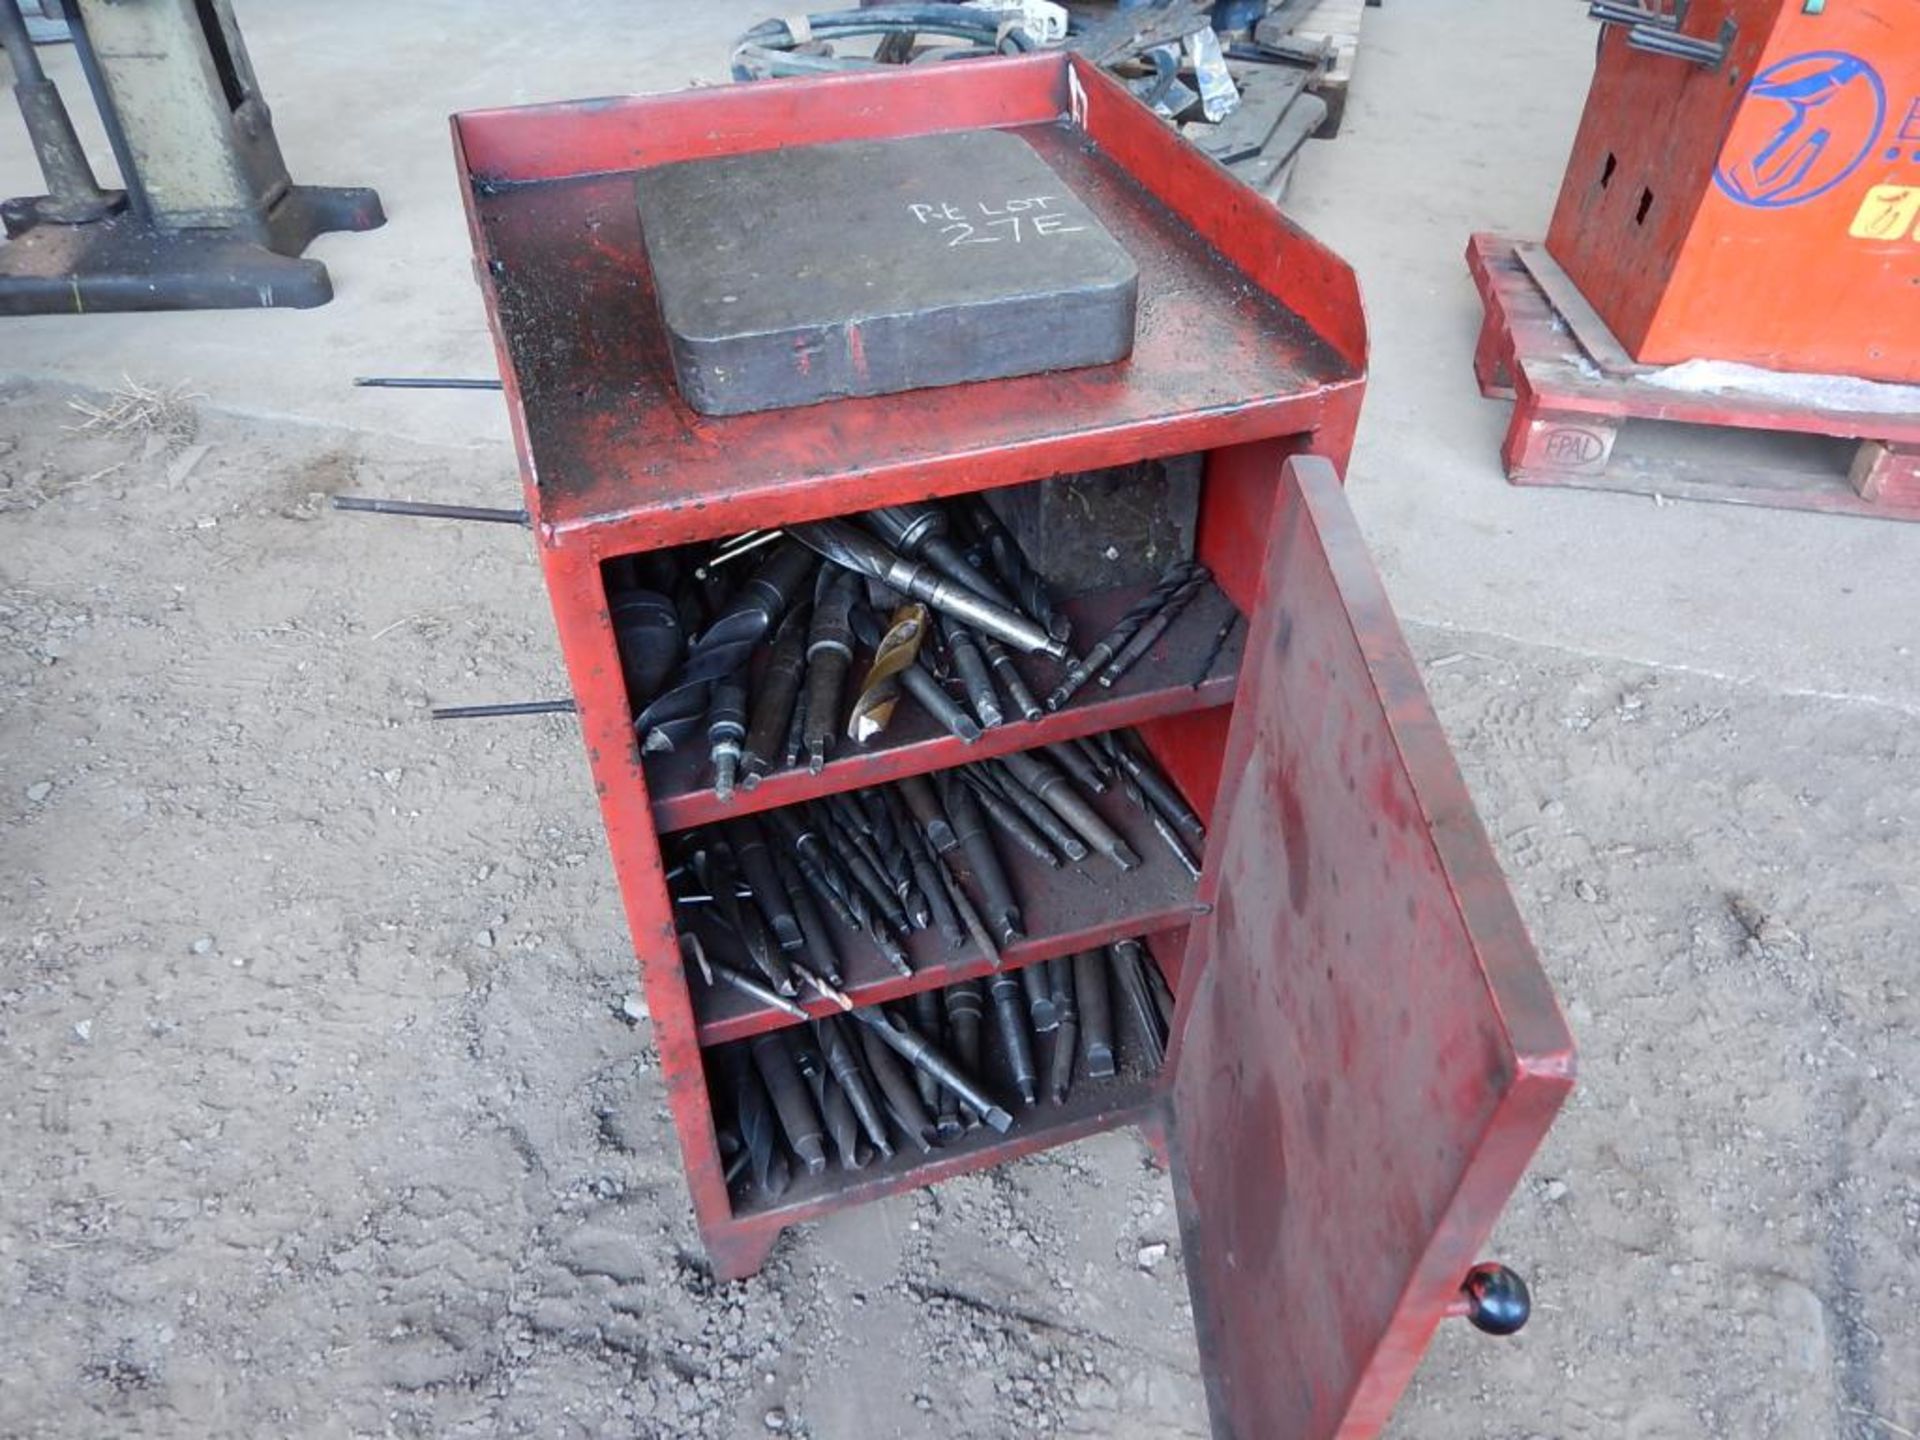 Herbert pillar drill t/w cabinet with drill bits - Image 2 of 2